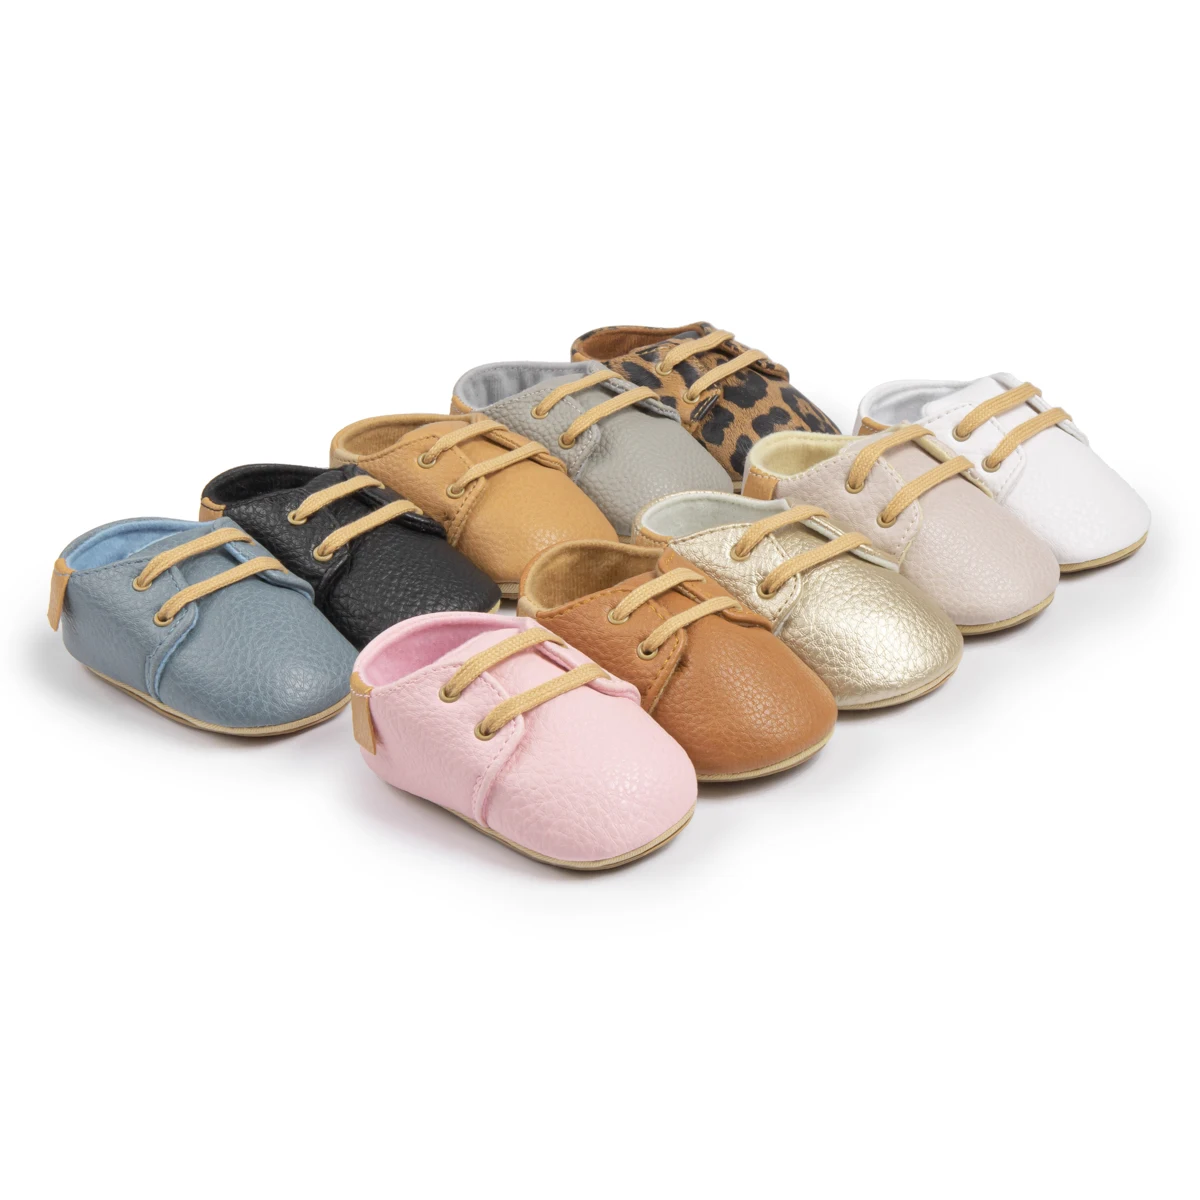 Fashion Outdoor Newborn Sneakers Infant First Walker Rubber Soft Sole Toddler Baby Dress Shoes For Babies